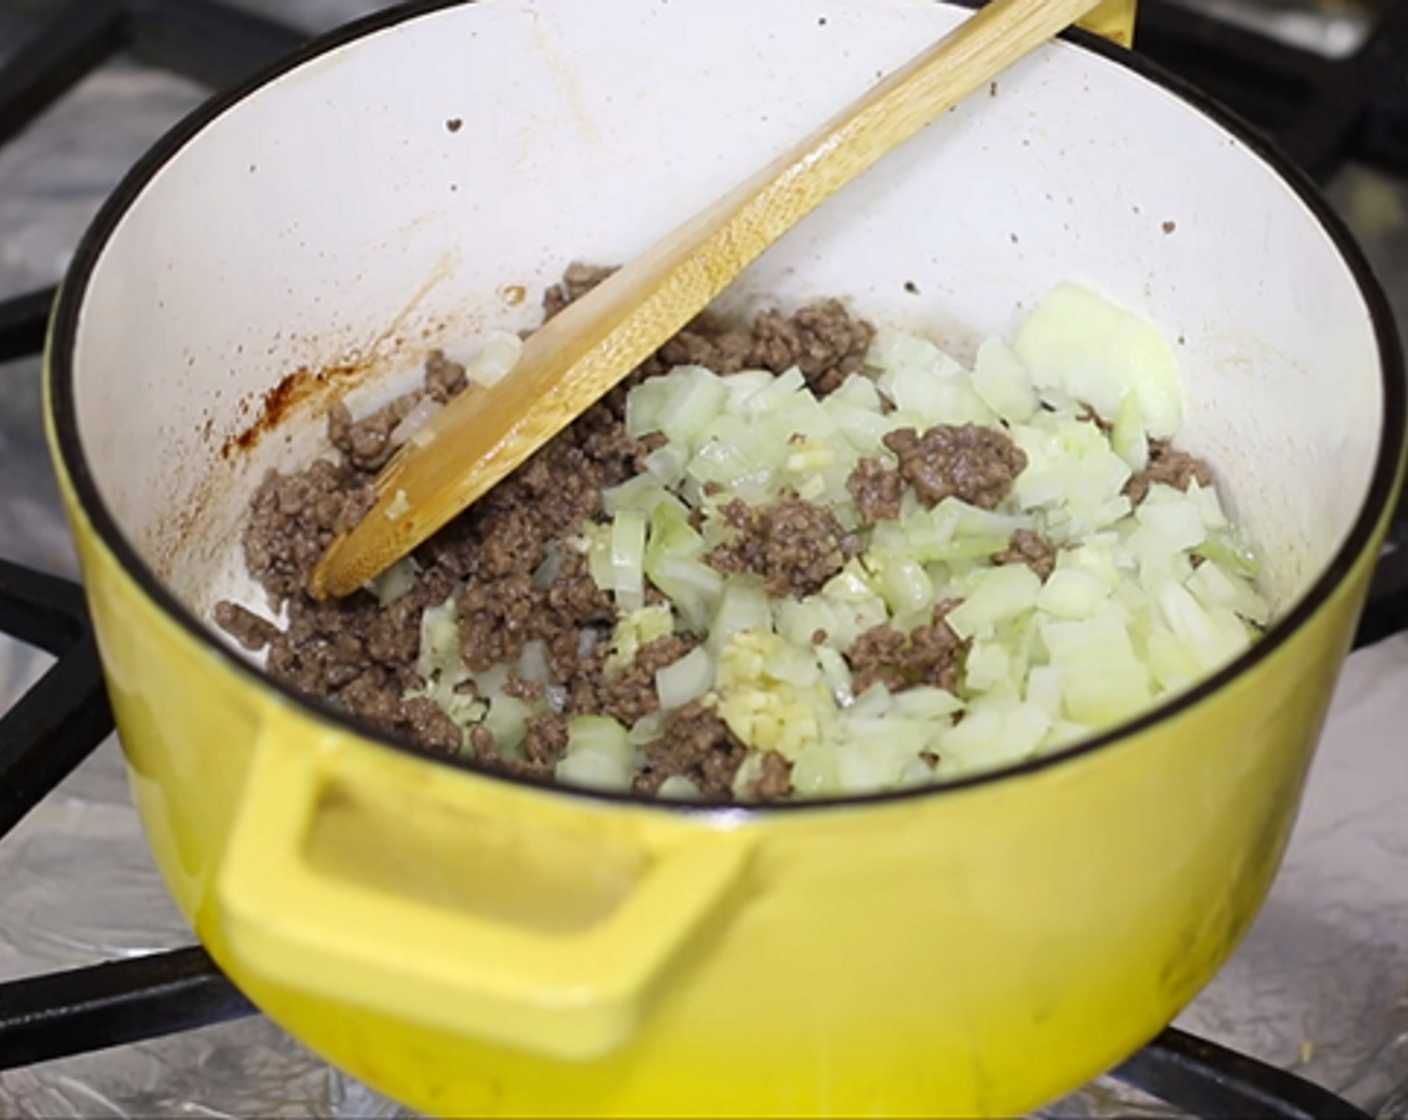 step 1 Preheat the oven to 350 degrees F (180 degrees C). Heat Olive Oil (1 tsp) in a pot over medium-high heat. Add Ground Beef (1 lb) and cook until browned. Strain excess grease. Add Onion (1), Garlic (3 cloves), Salt (to taste) and Ground Black Pepper (to taste) and cook for 3-5 minutes.